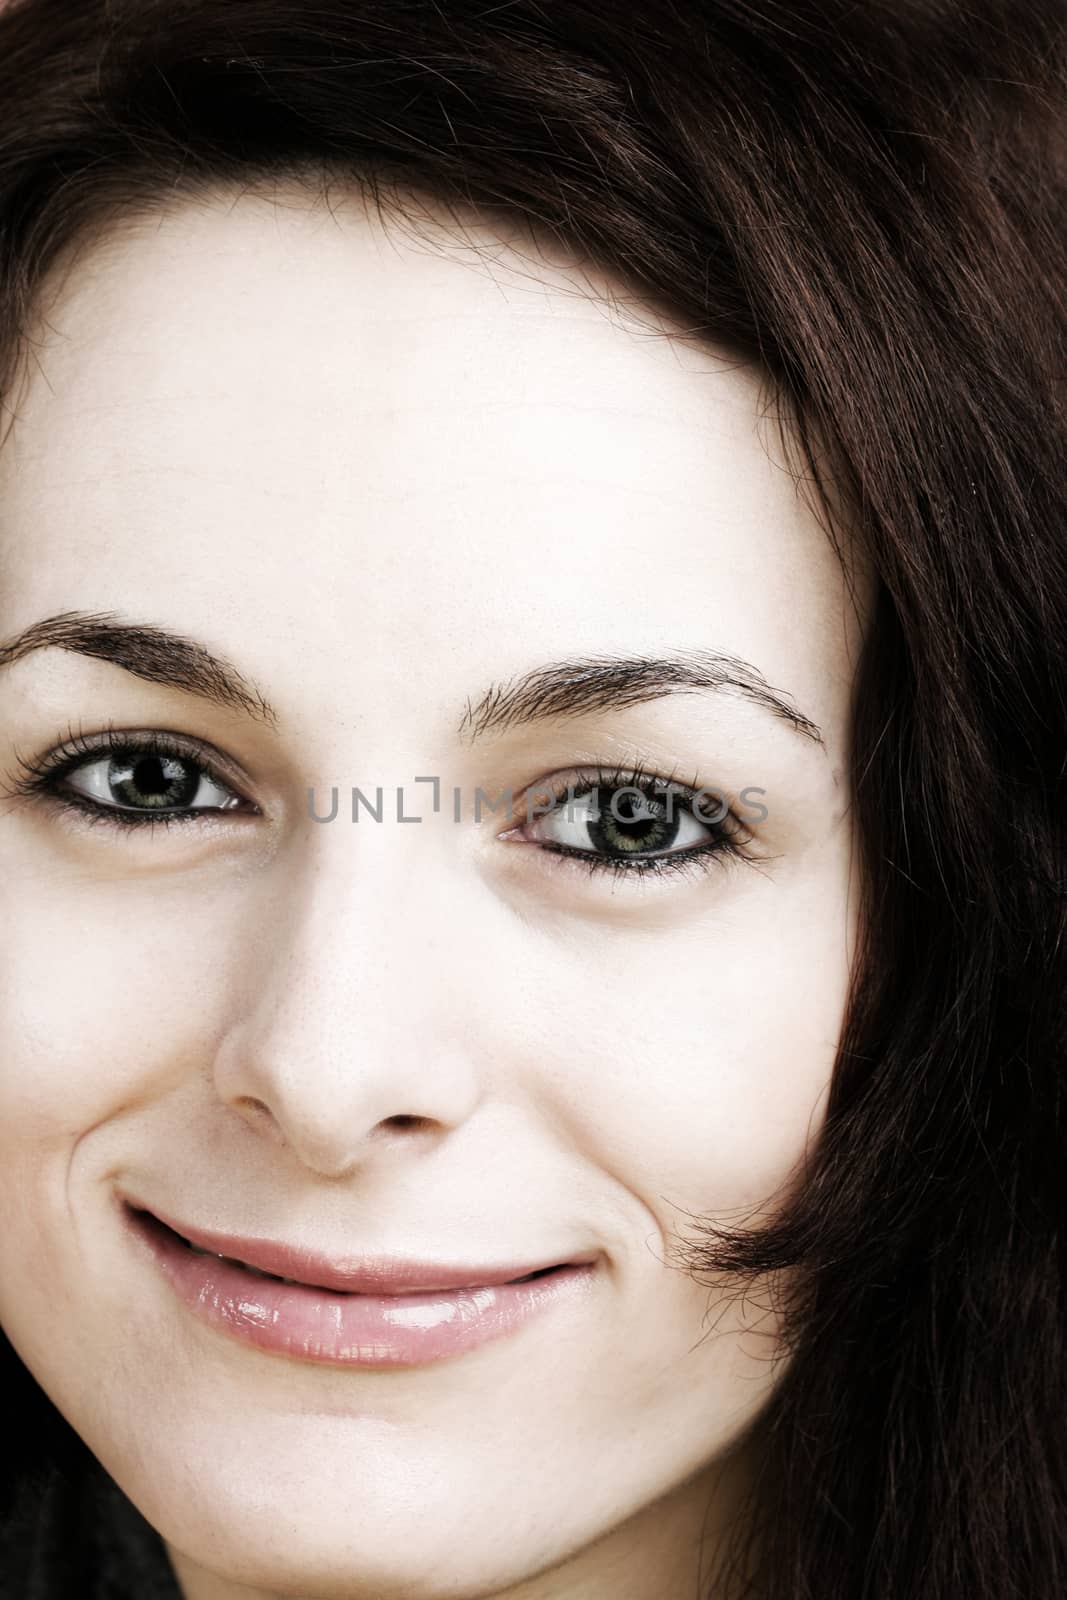 Portrait of a happy beautiful woman with green eyes.